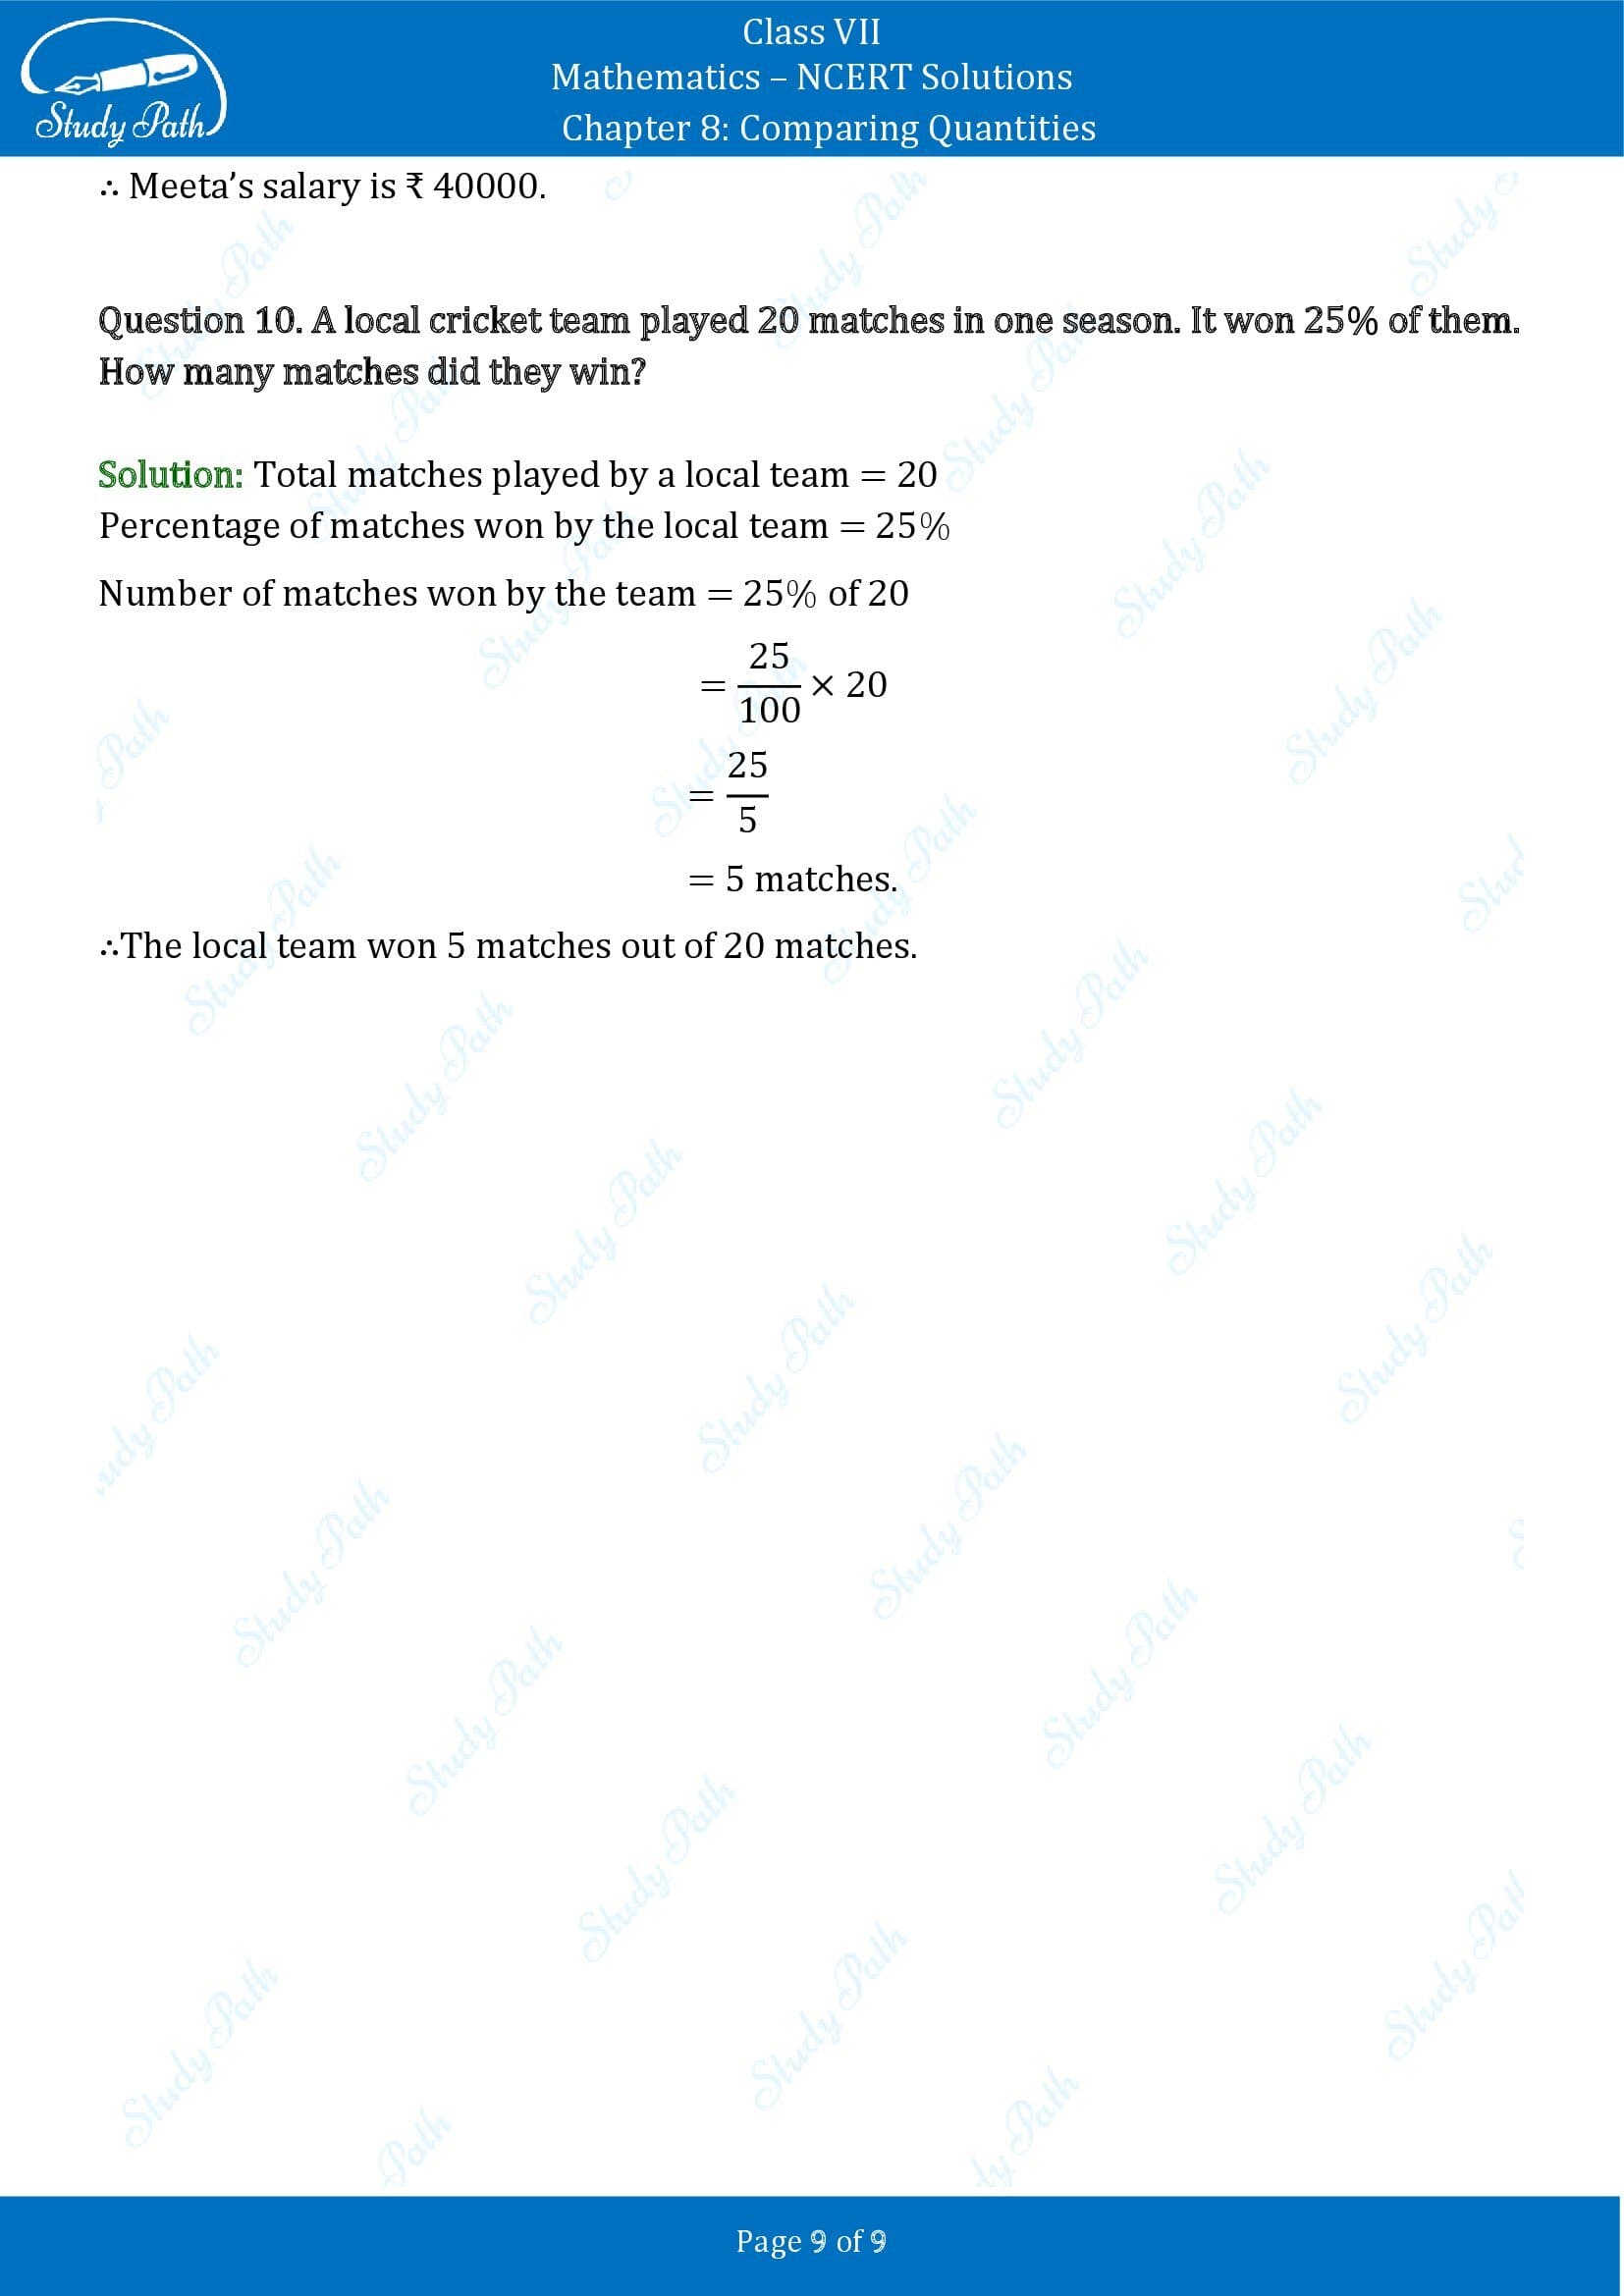 NCERT Solutions for Class 7 Maths Chapter 8 Comparing Quantities Exercise 8.2 00009